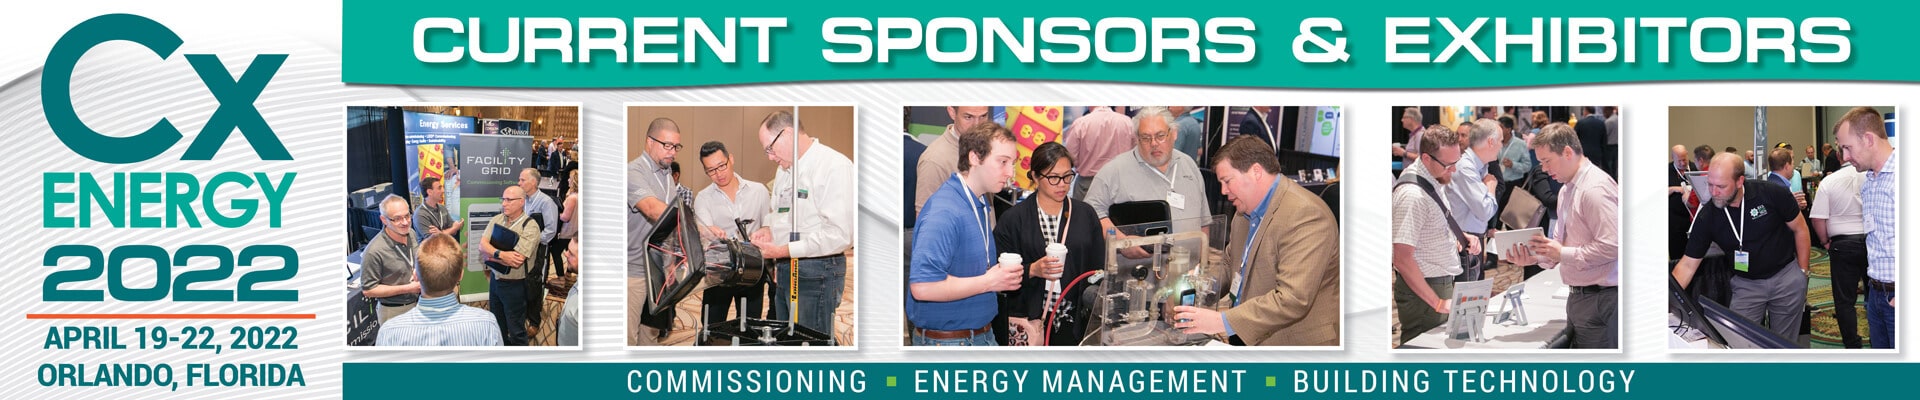 List of current exhibitor and sponsors for CxEnergy 2022, Orlando Florida